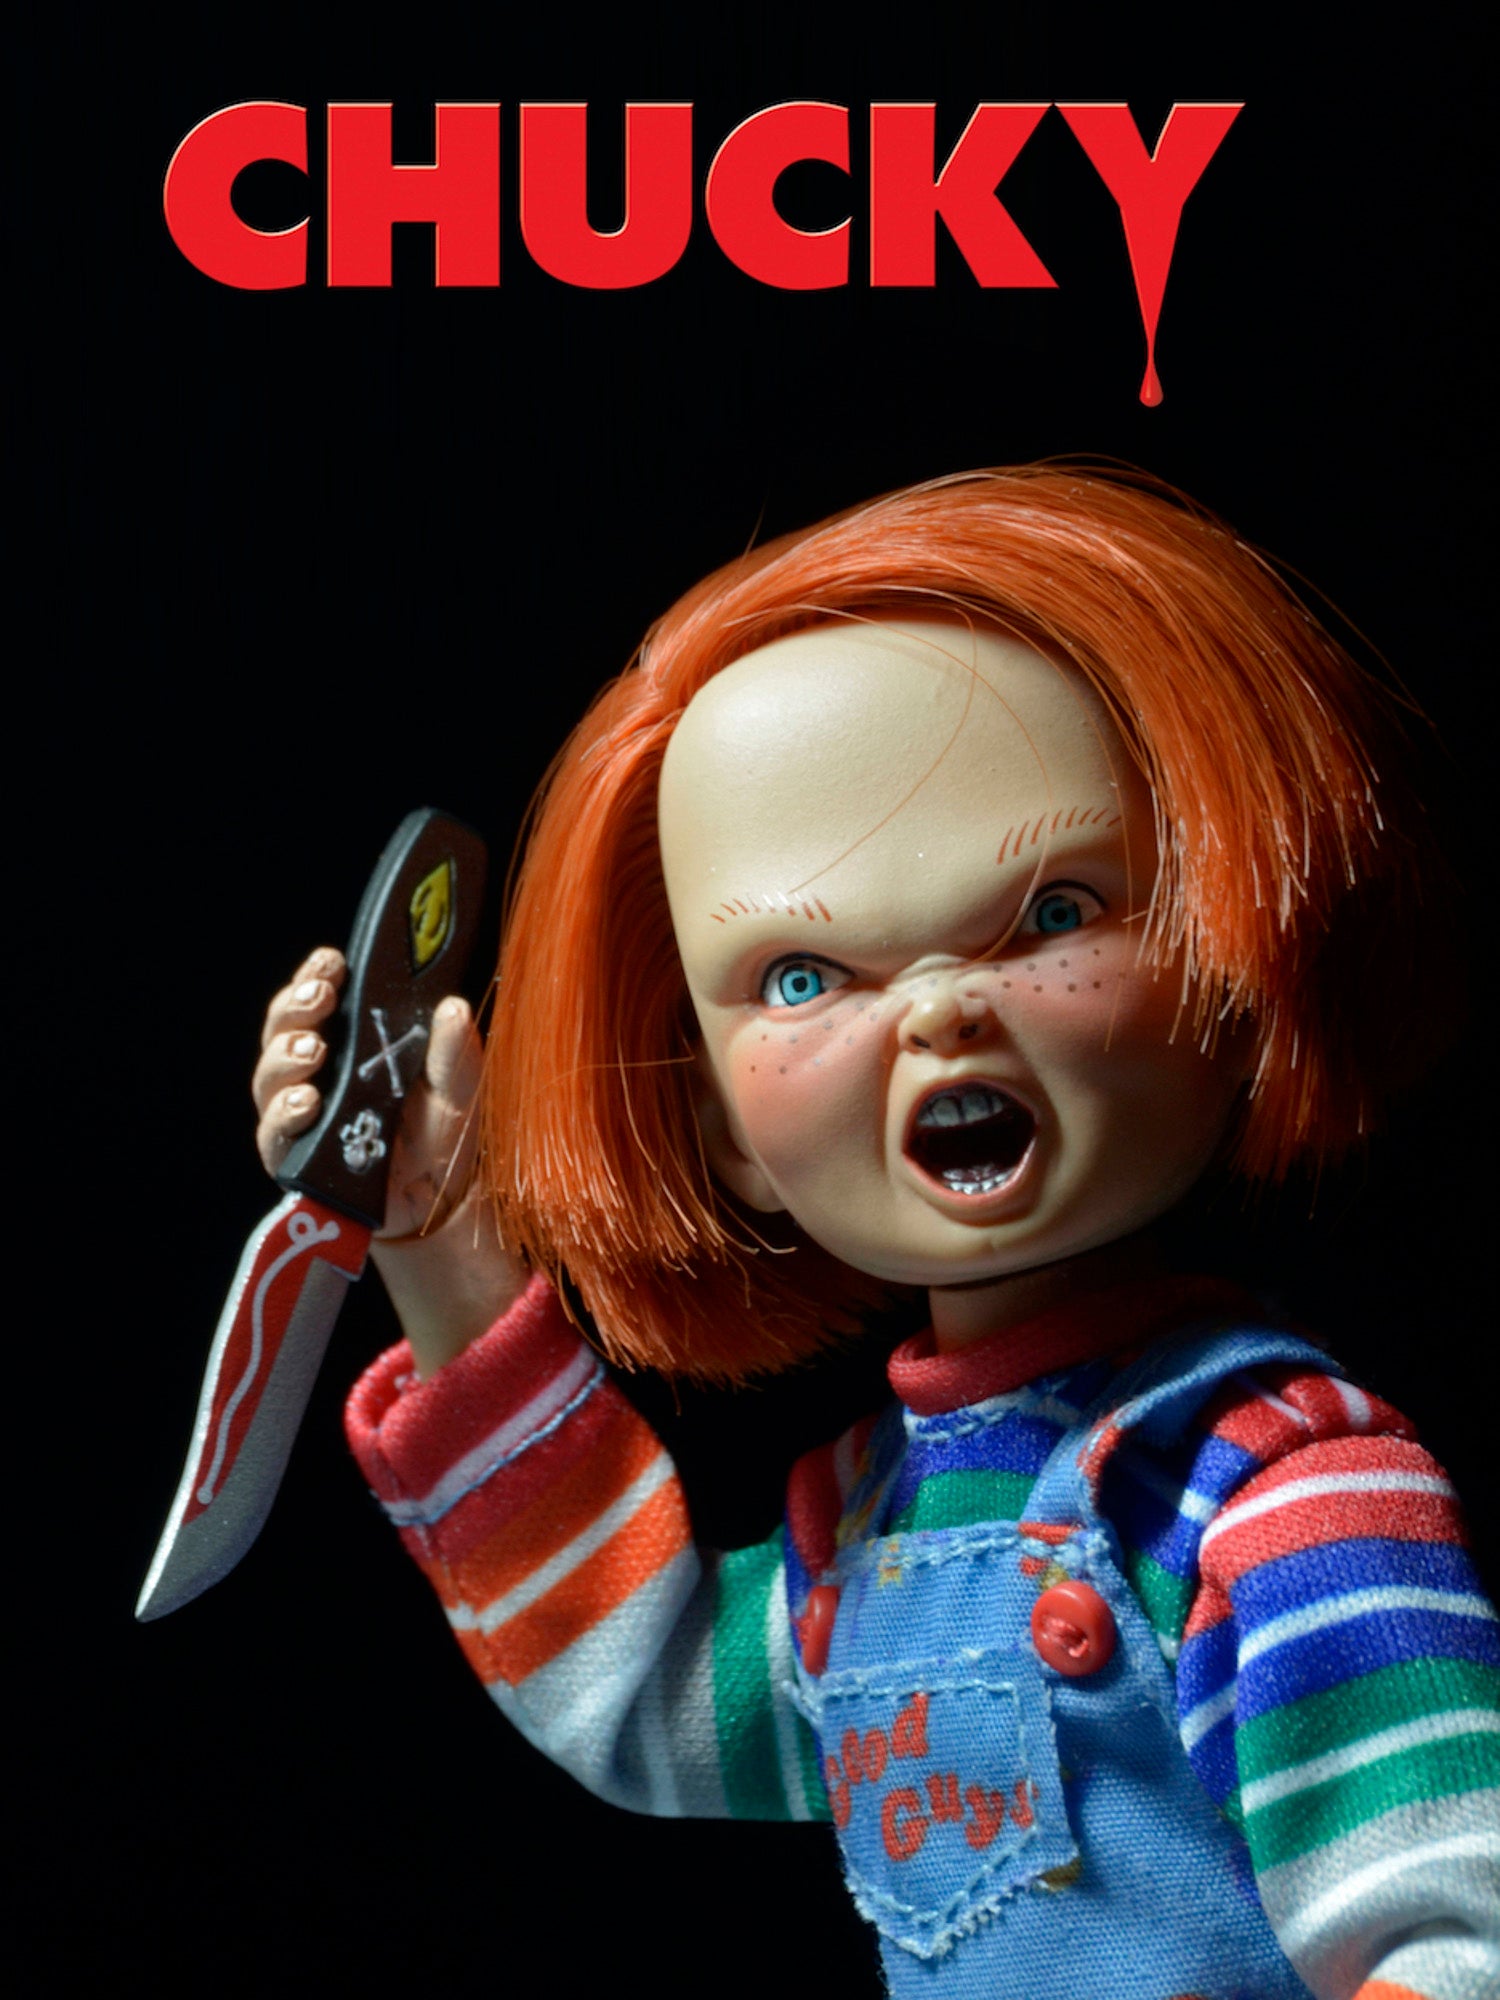 NECA - Chucky - 8" Scale Clothed Action Figure - costumes.com